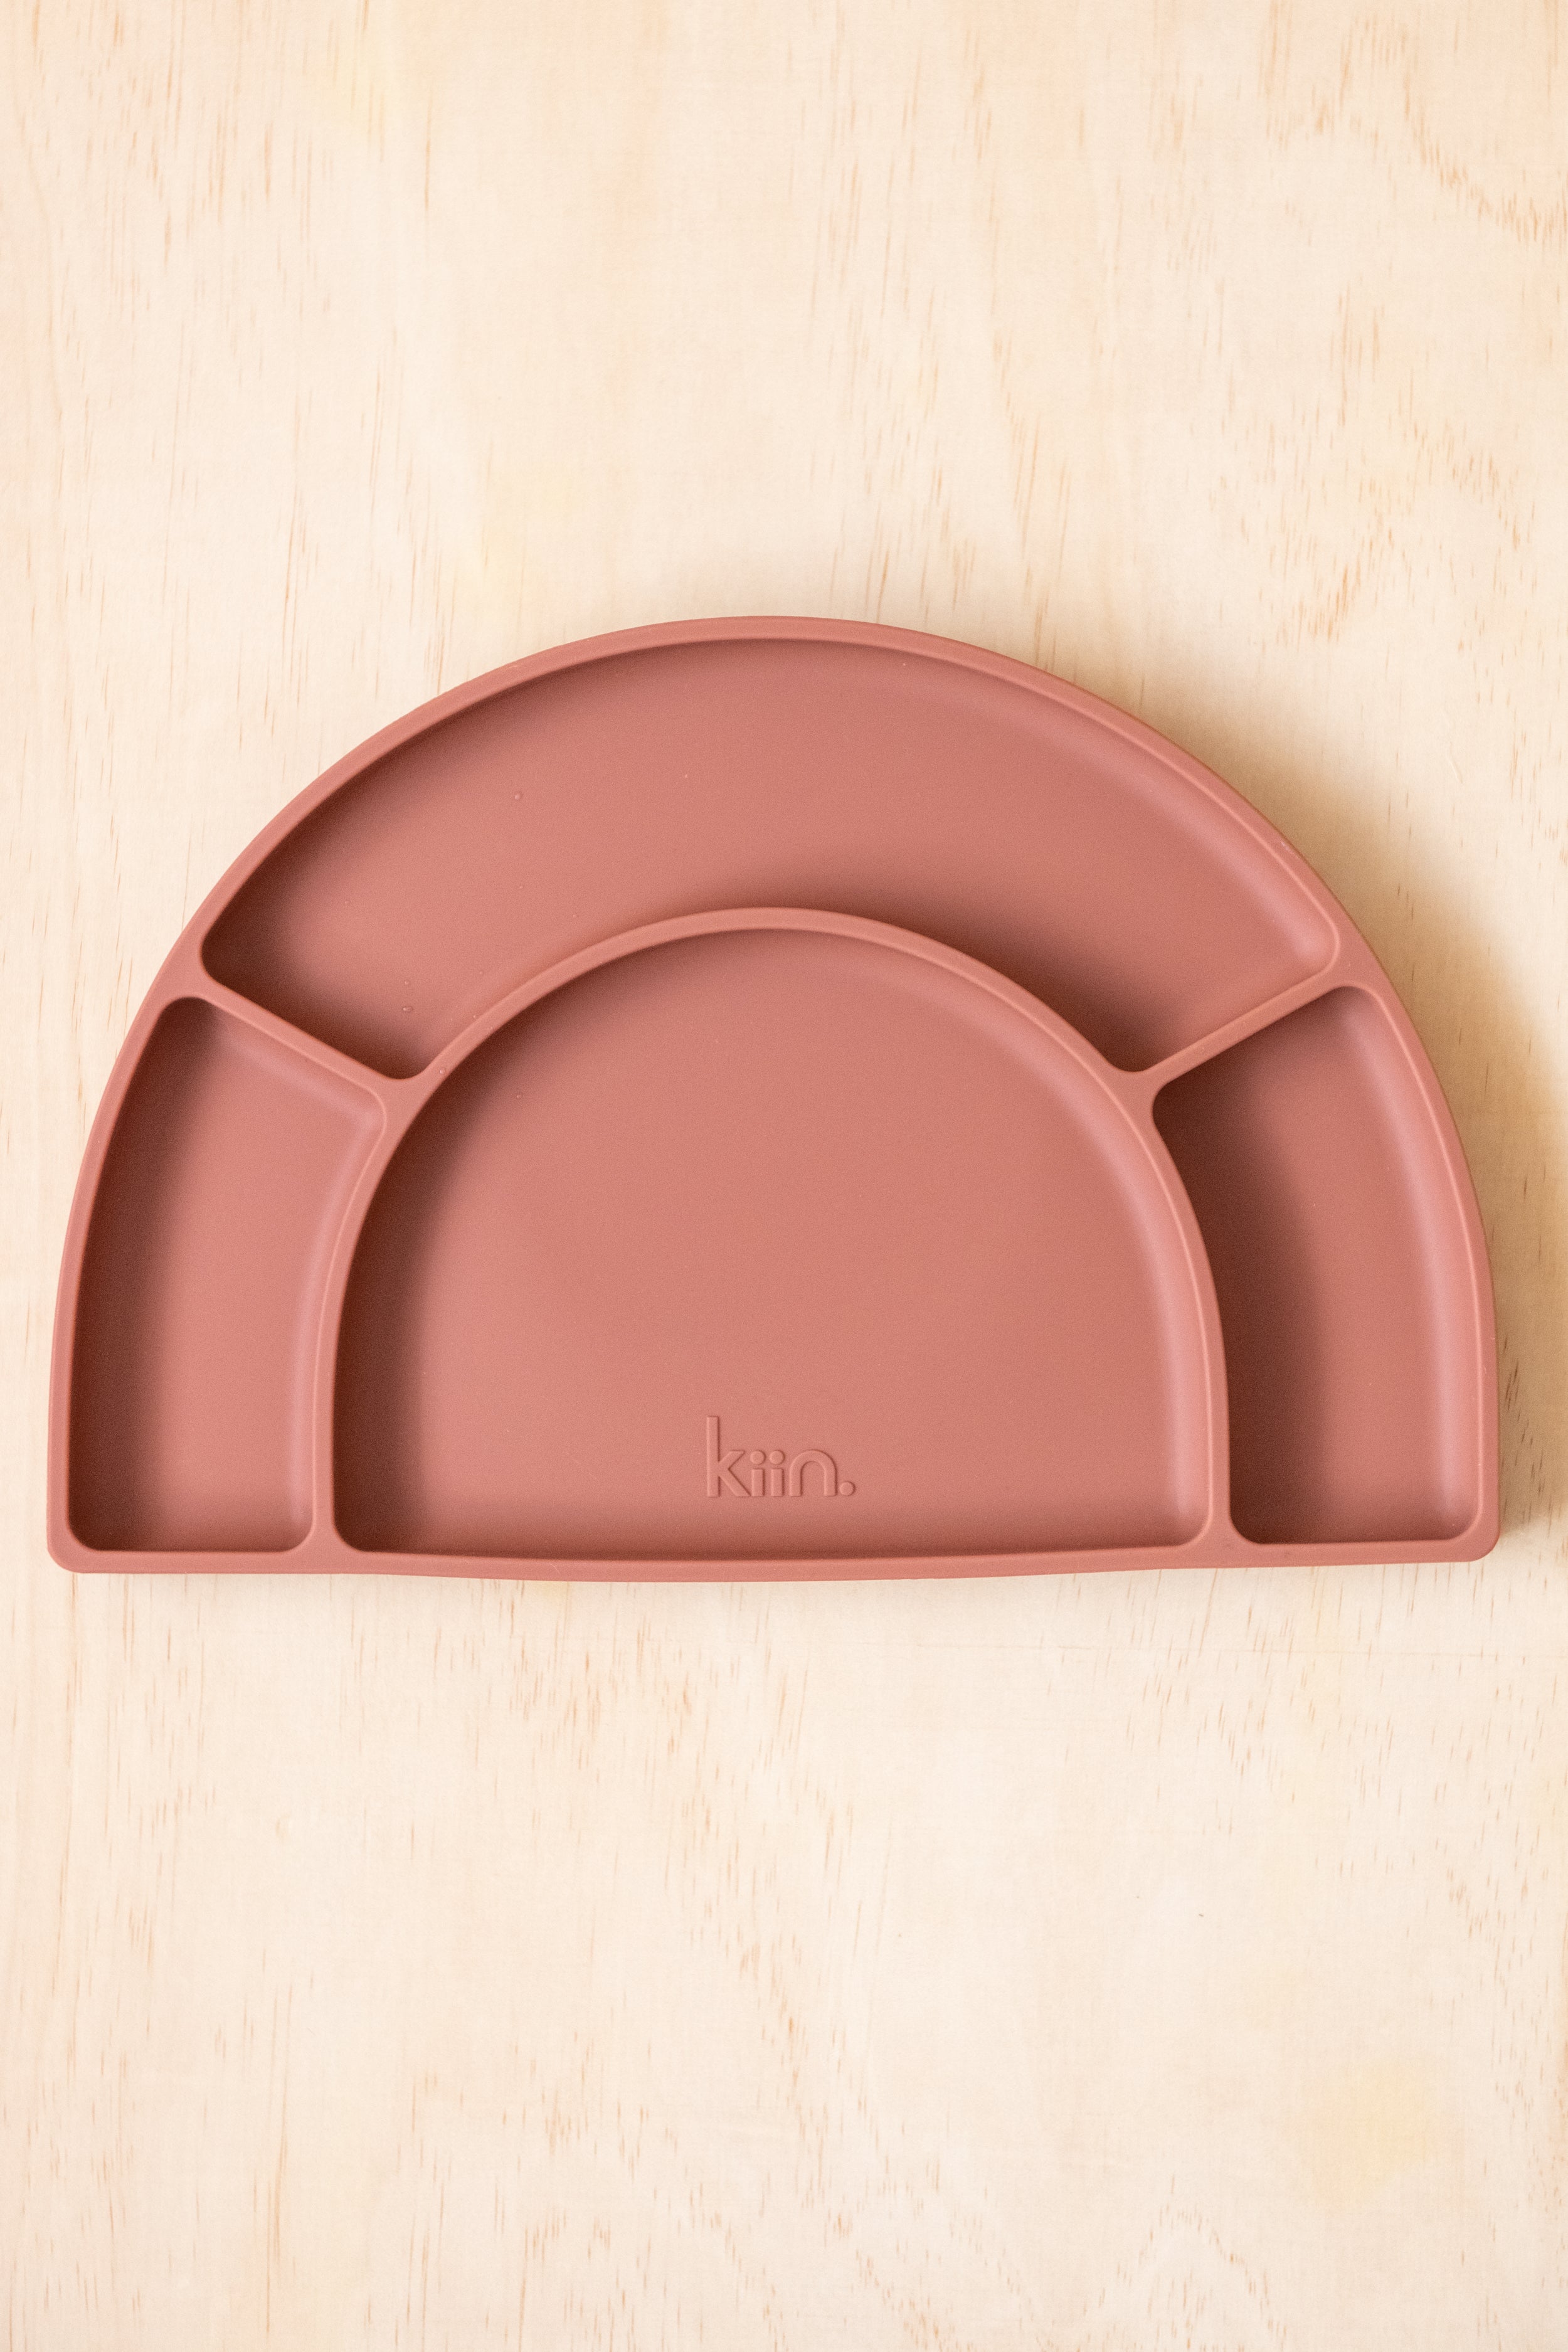 Kiin | Silicone Divided Plate